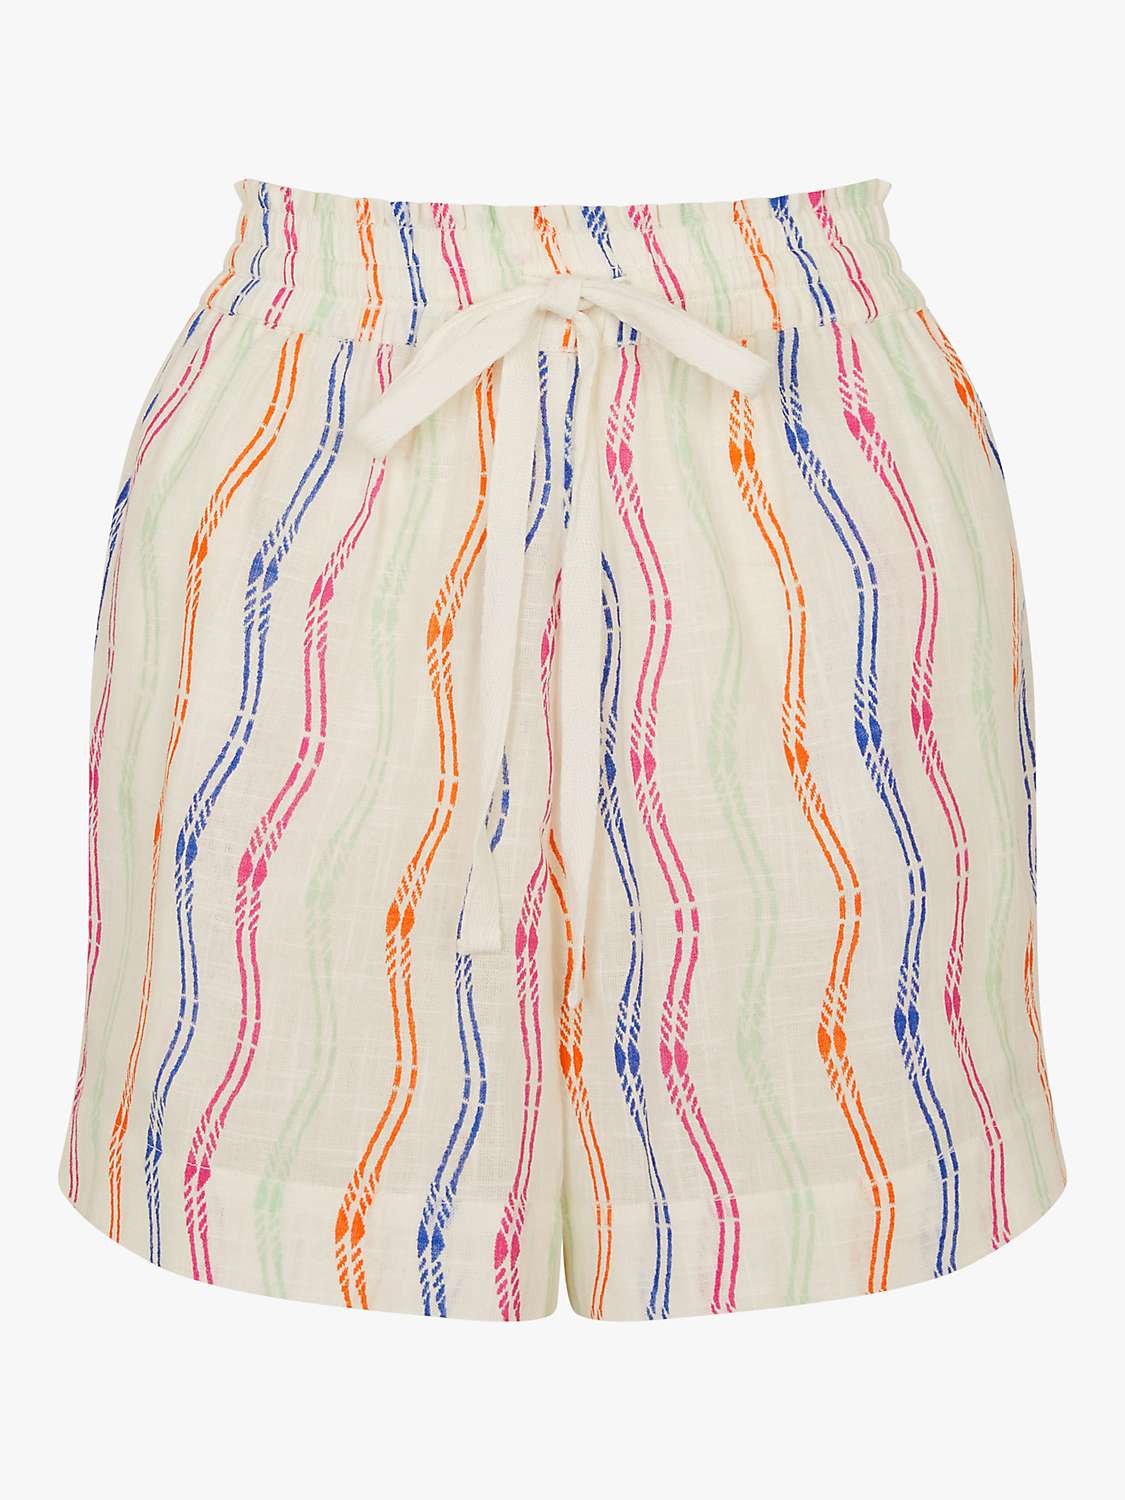 Buy Accessorize Striped Shorts, Multi Online at johnlewis.com